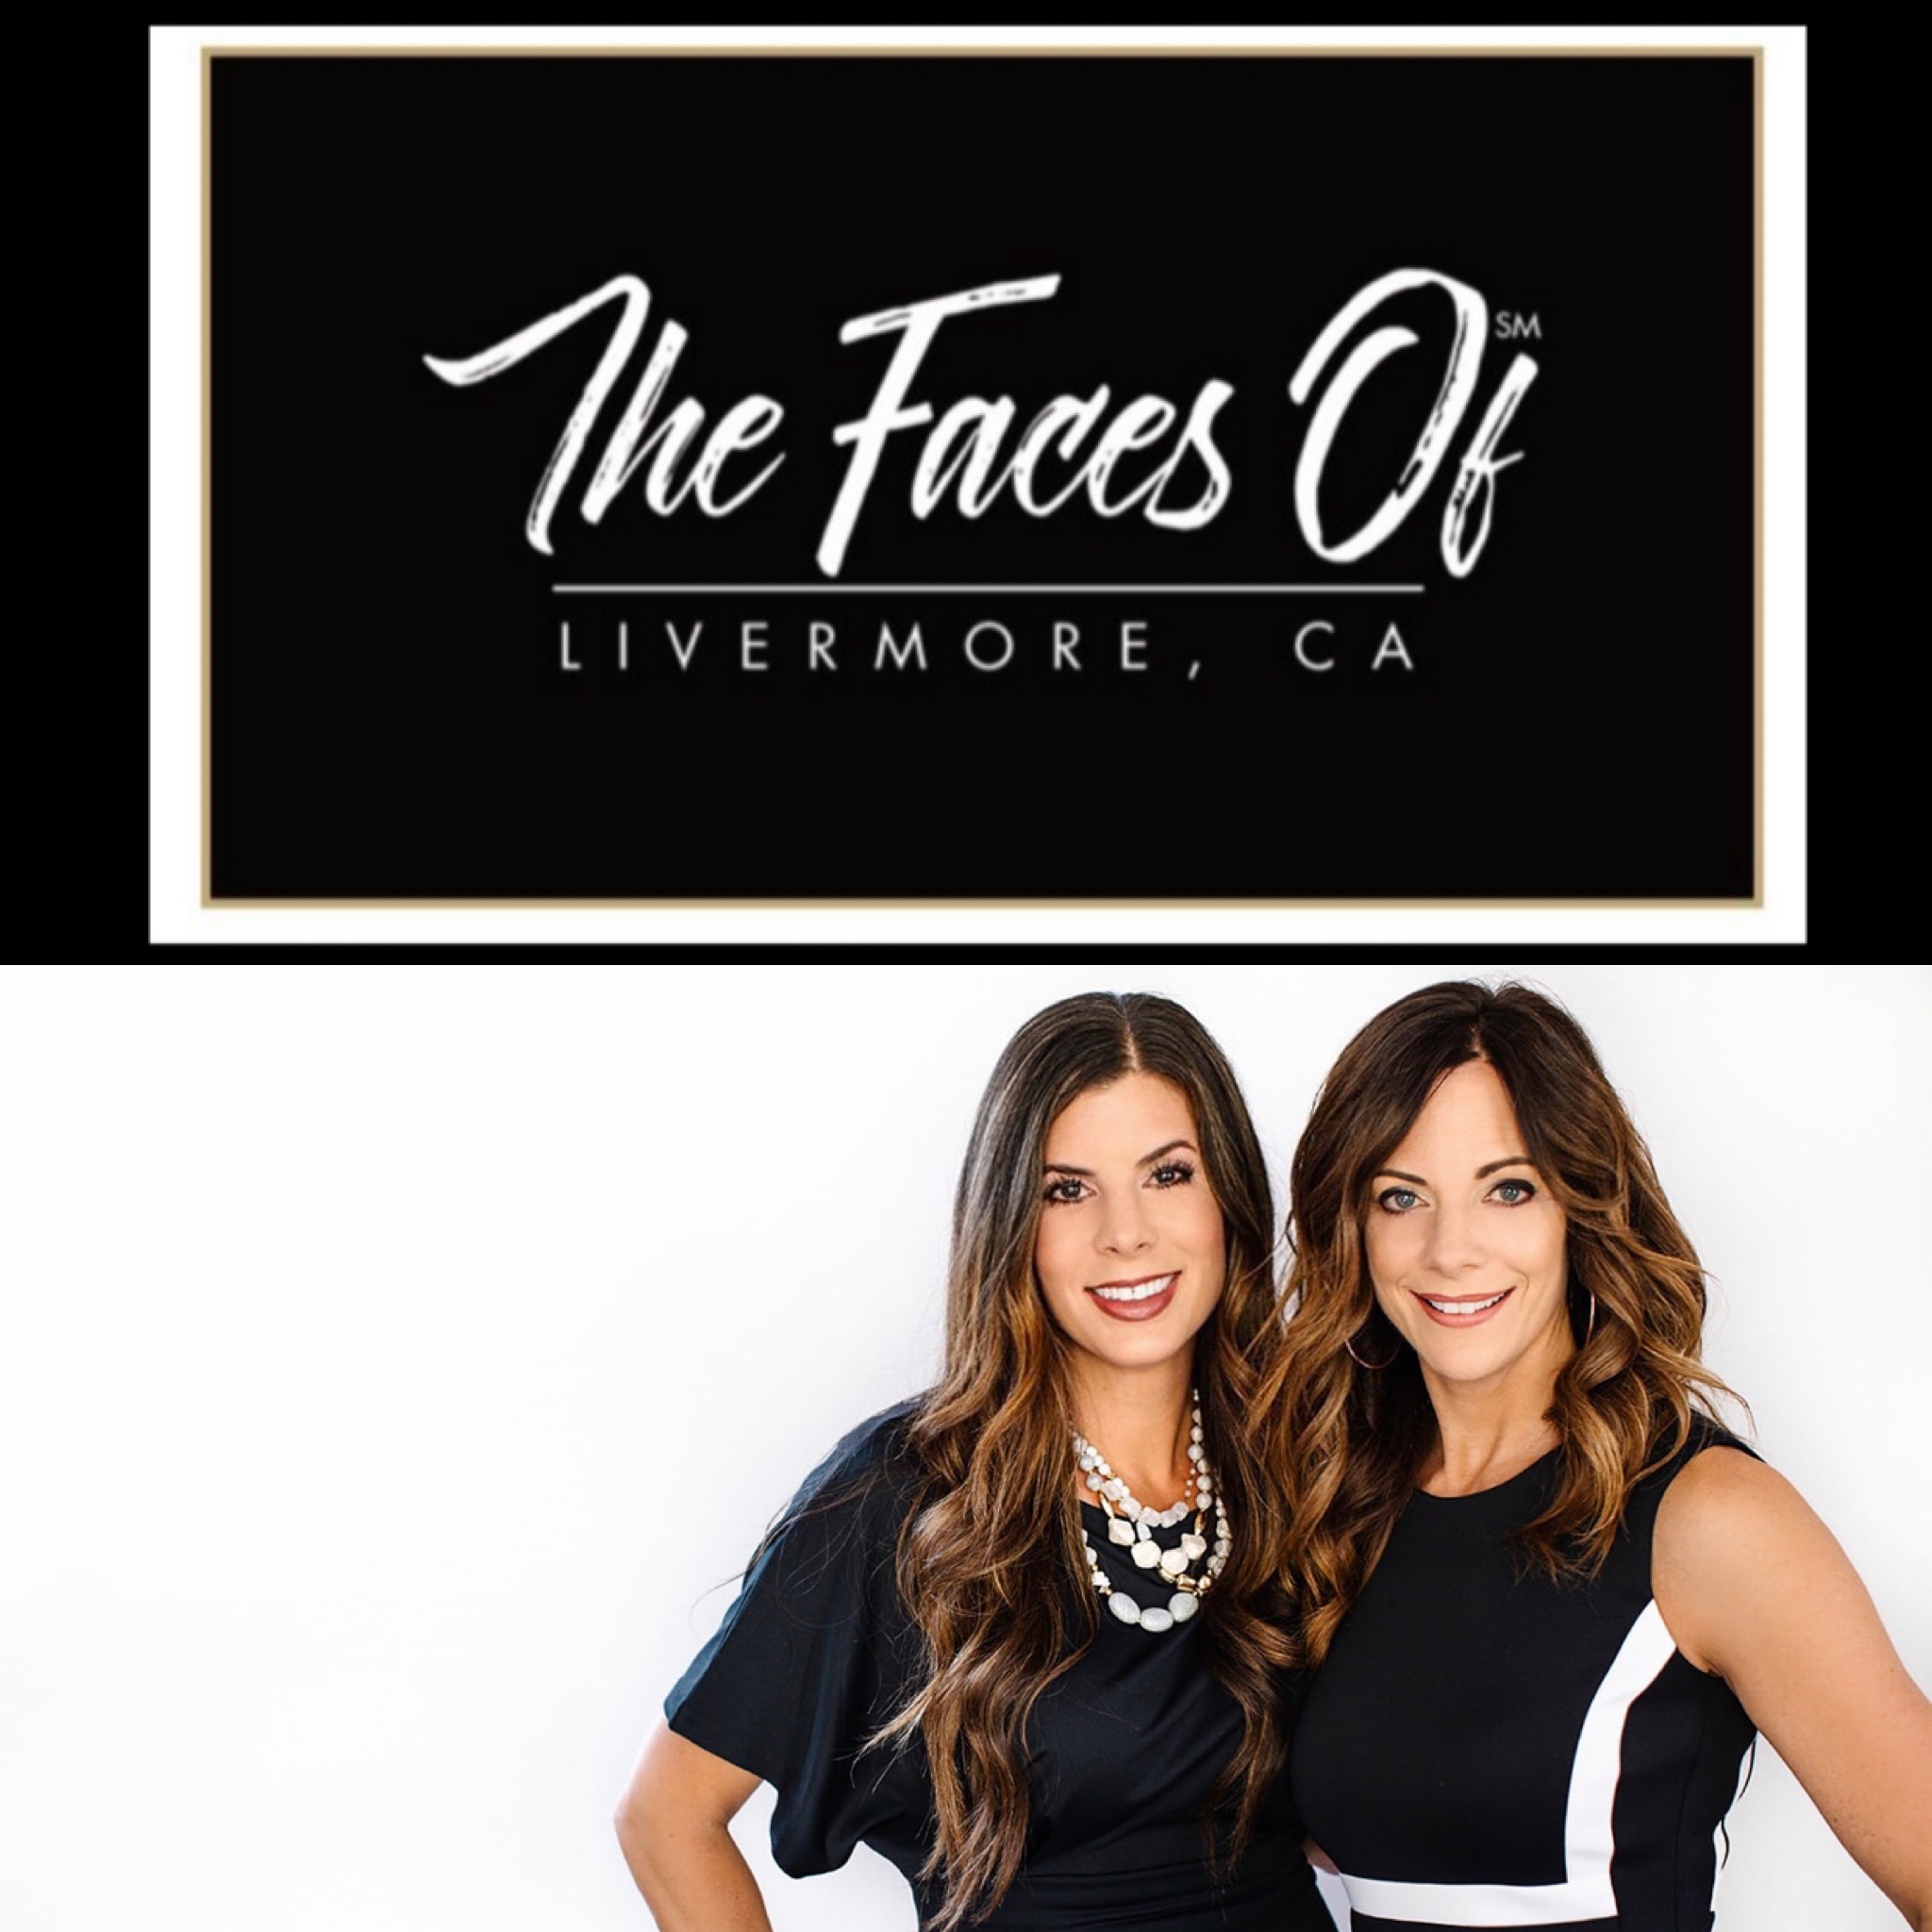 The Faces Of Livermore